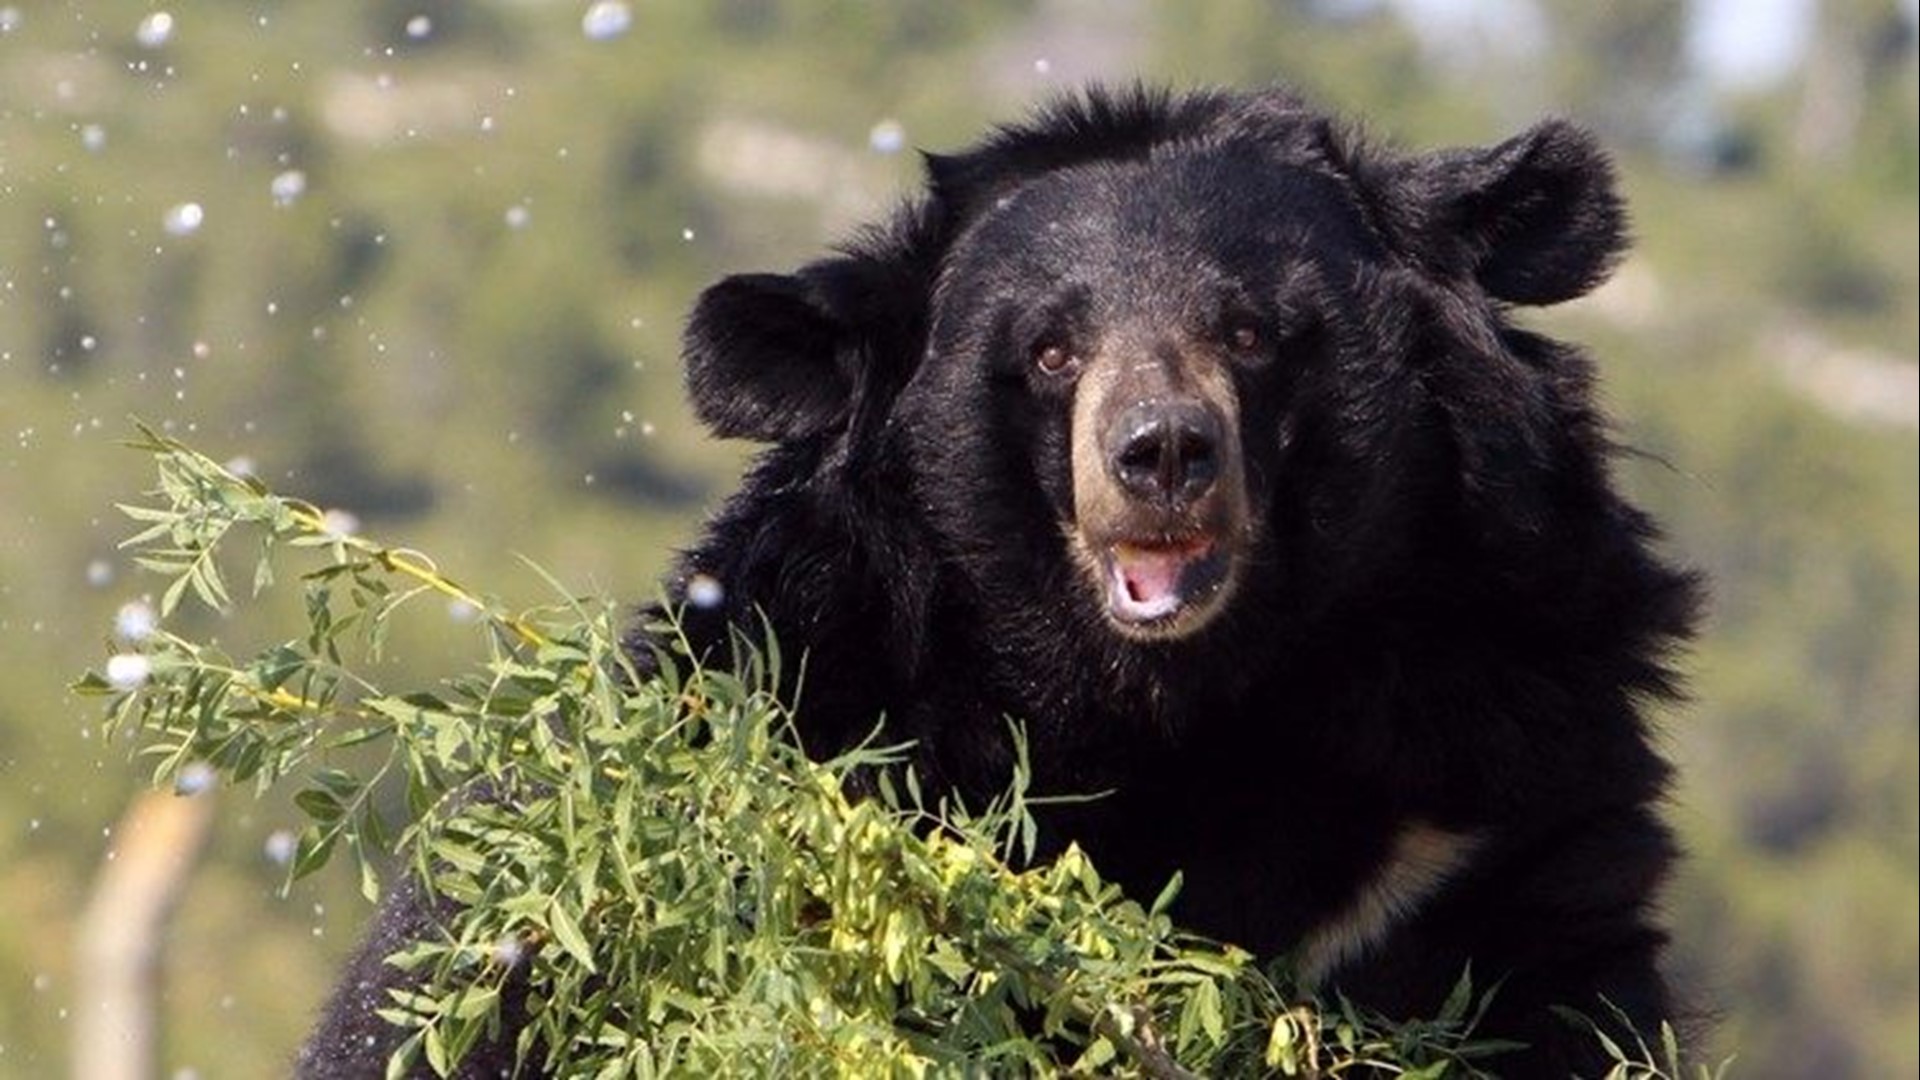 Colorado Parks and Wildlife said there have been three bear attacks in the state this year.